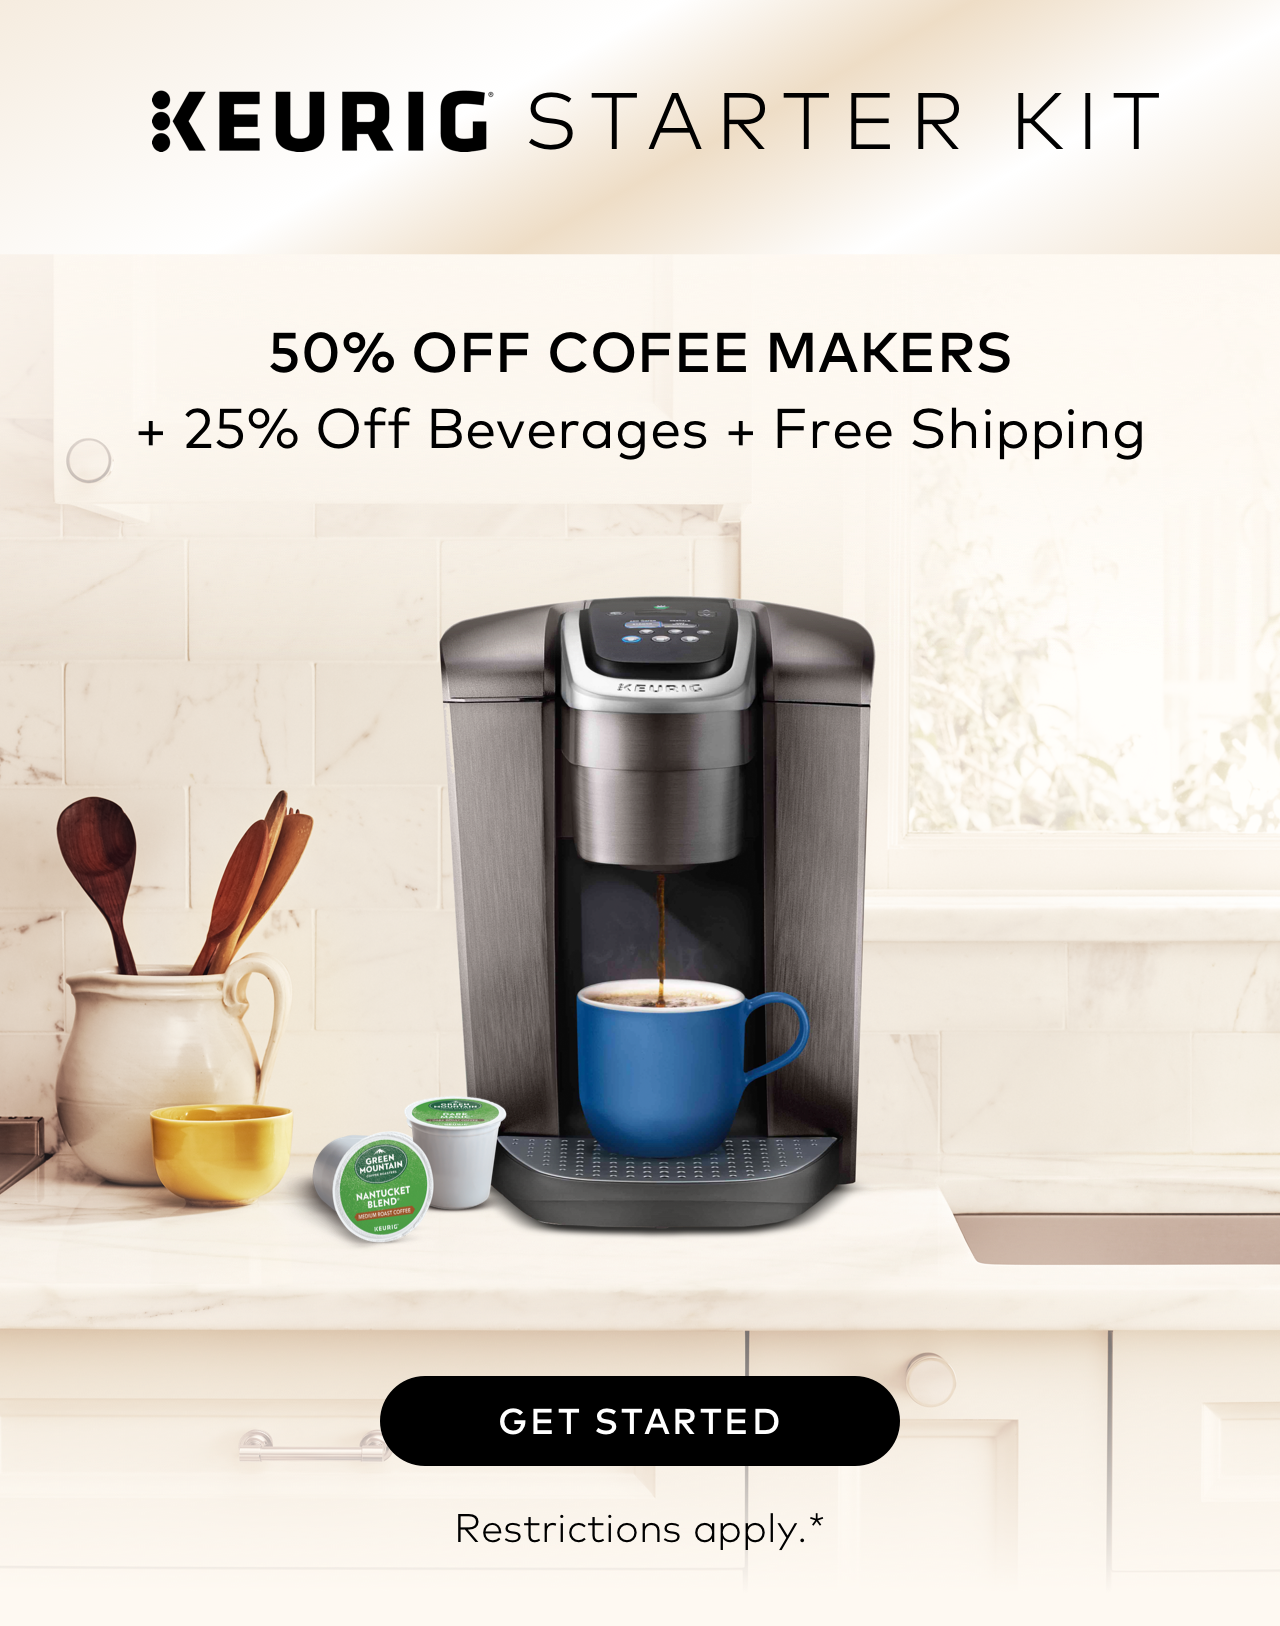 50% off Coffee Makers + 25% off Beverages + Free Shipping